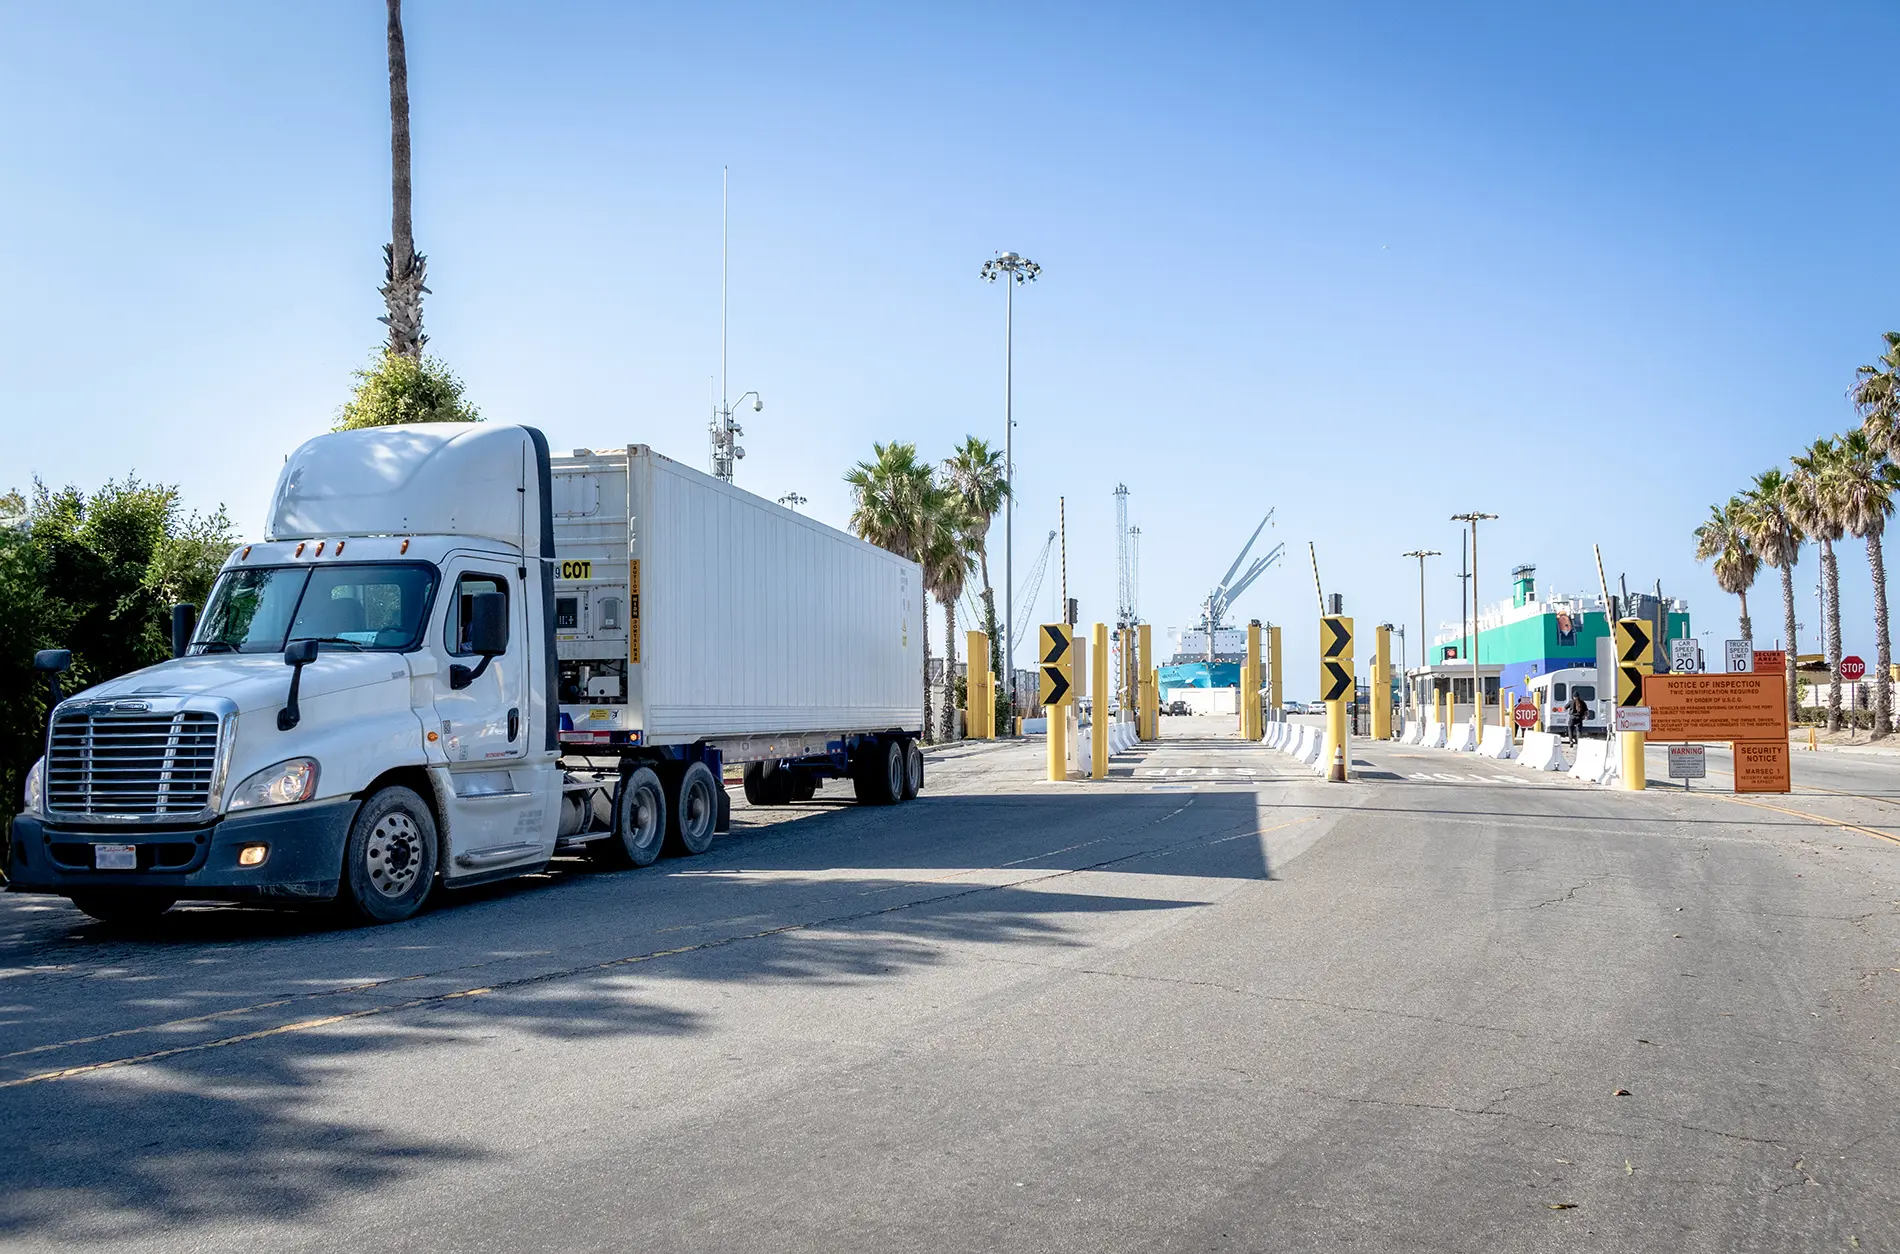 A semi-truck with a white trailer approaches a security checkpoint with barriers and yellow signs, ensuring compliance with port regulations. Palm trees and port cranes are visible in the background under a clear blue sky.